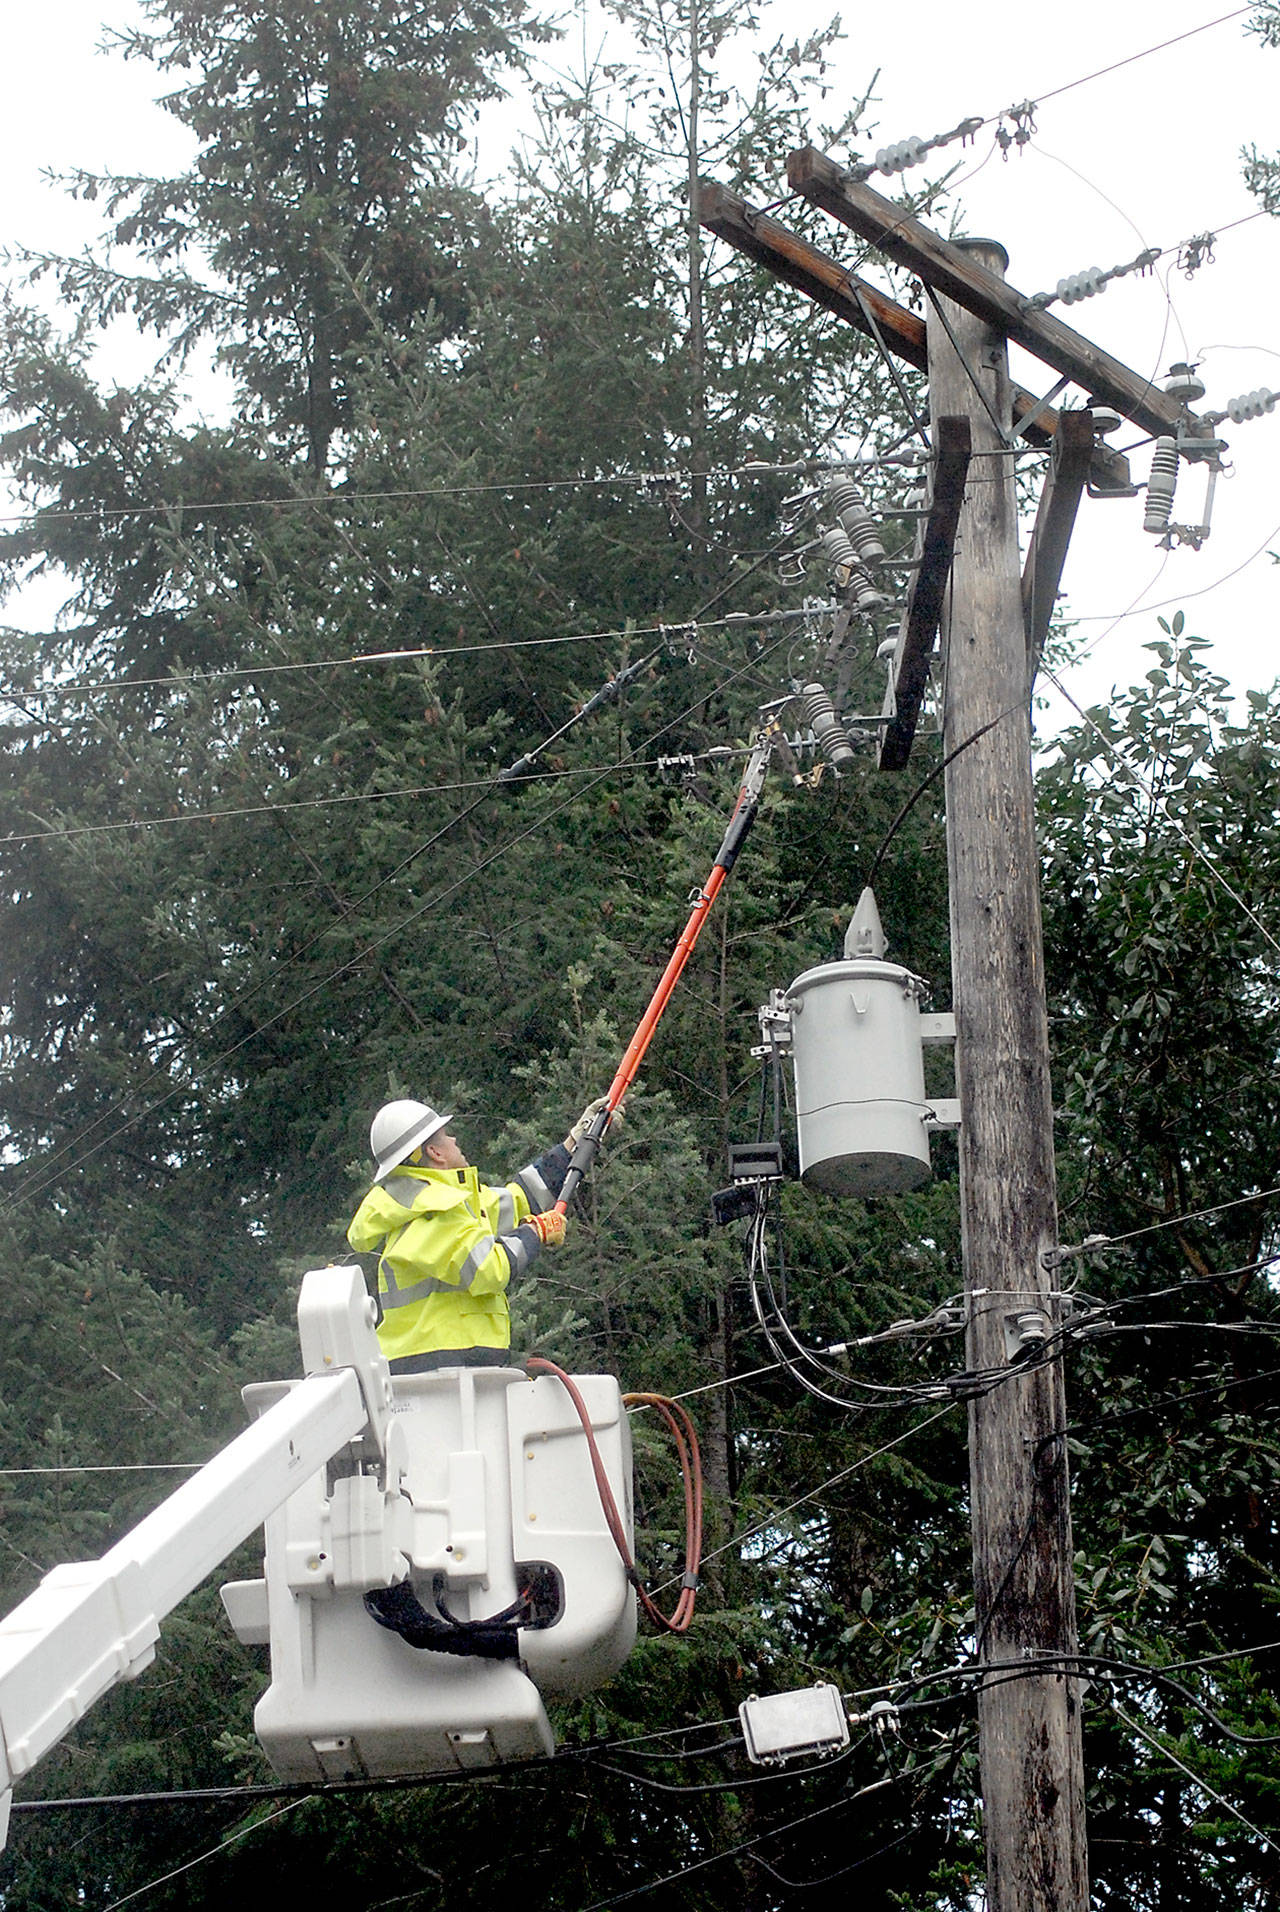 Clallam County PUD line worker Richard Christiansen works to isolate a damaged power circuit at Gasman Road at Northwood Lane that left customers in The Bluffs neighborhood east of Port Angeles without power on Thursday. (Keith Thorpe/Peninsula Daily News)